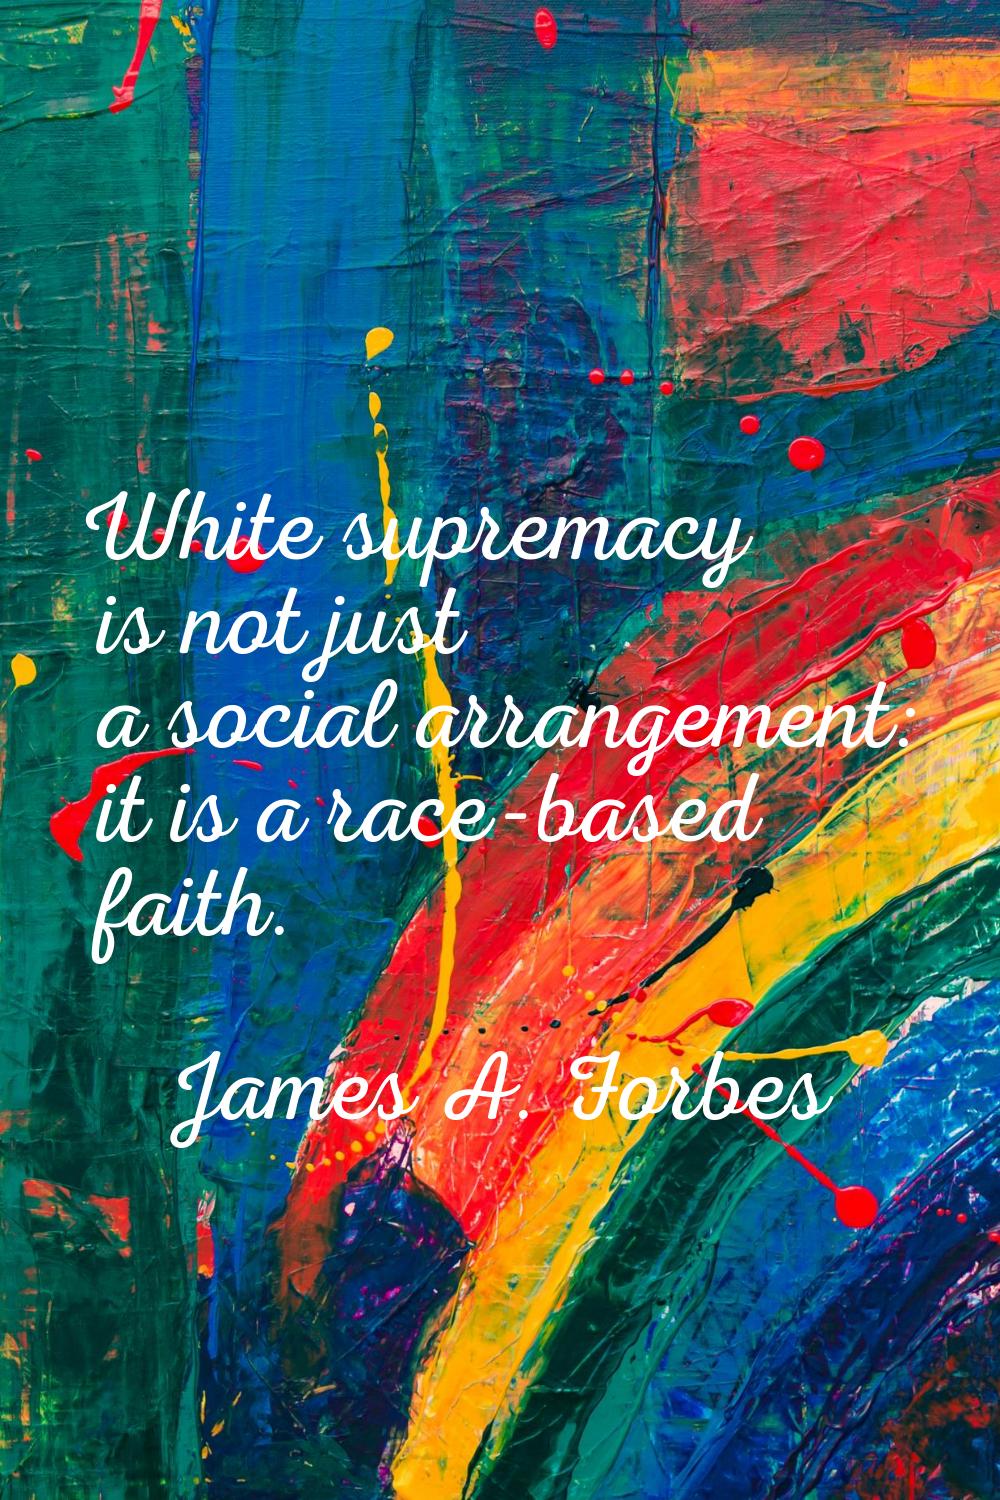 White supremacy is not just a social arrangement: it is a race-based faith.